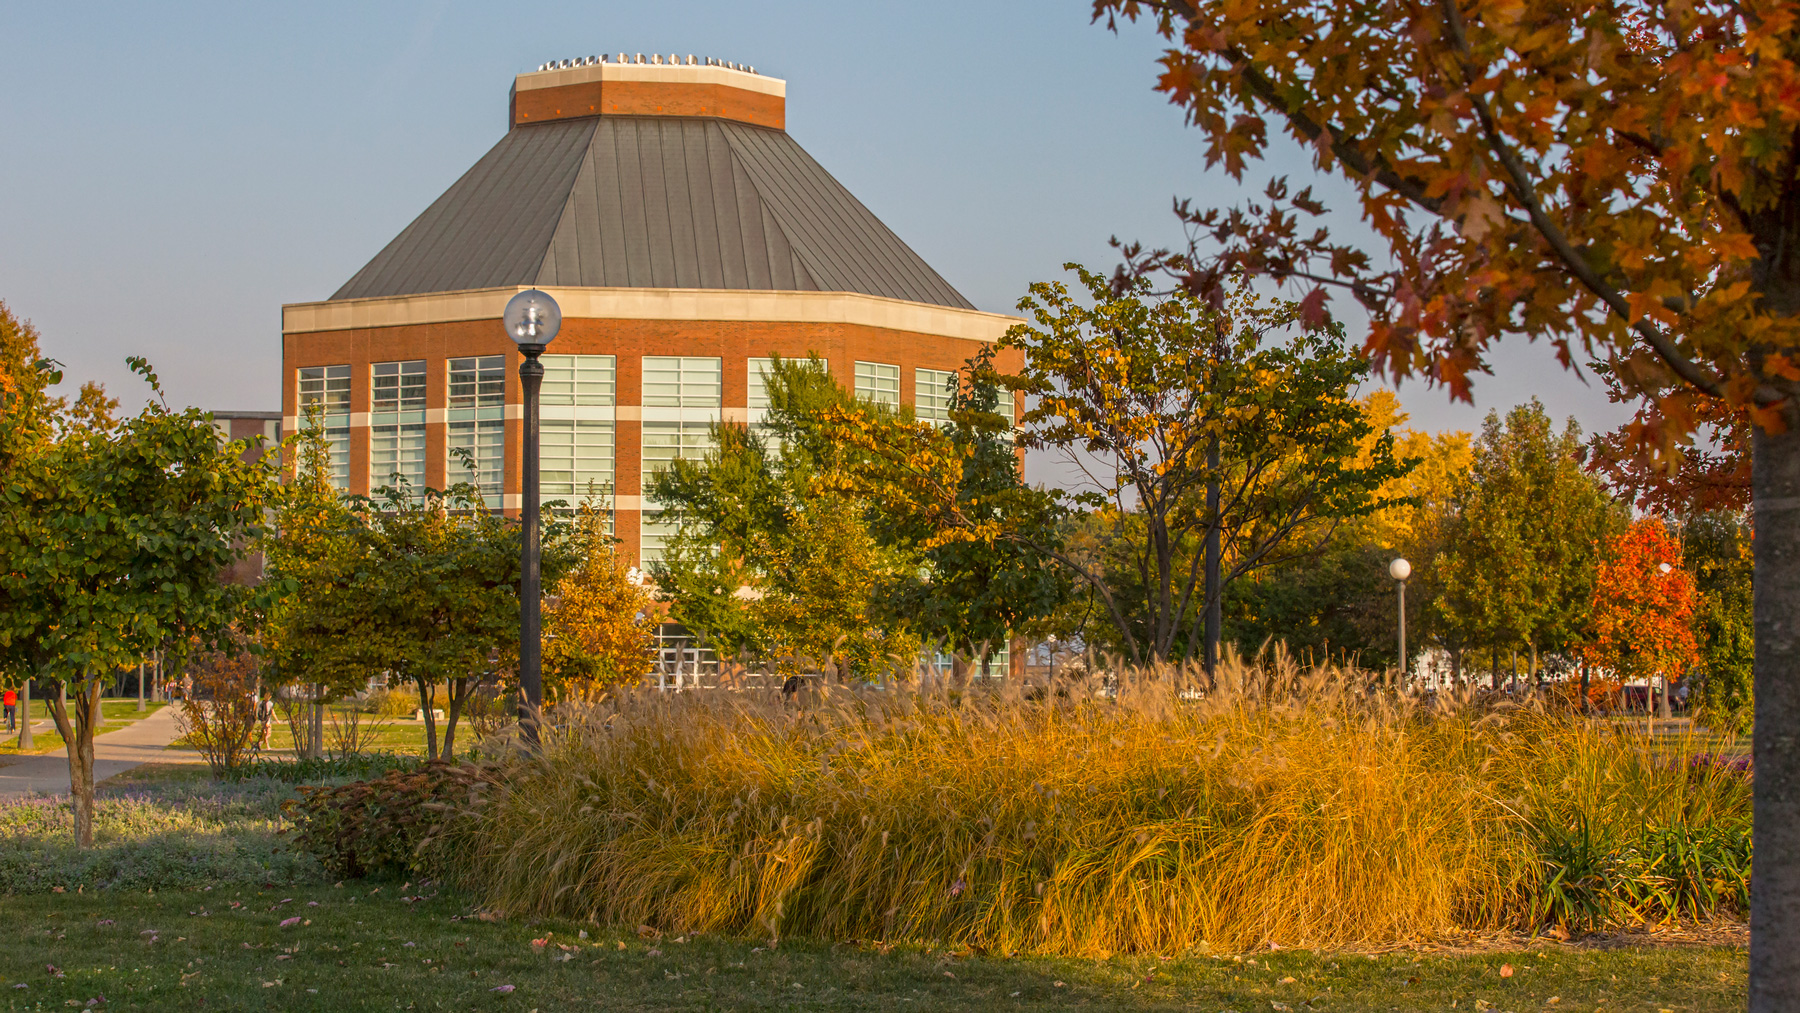 ACES Librarry in Fall. Photo by L. Brian Stauffer